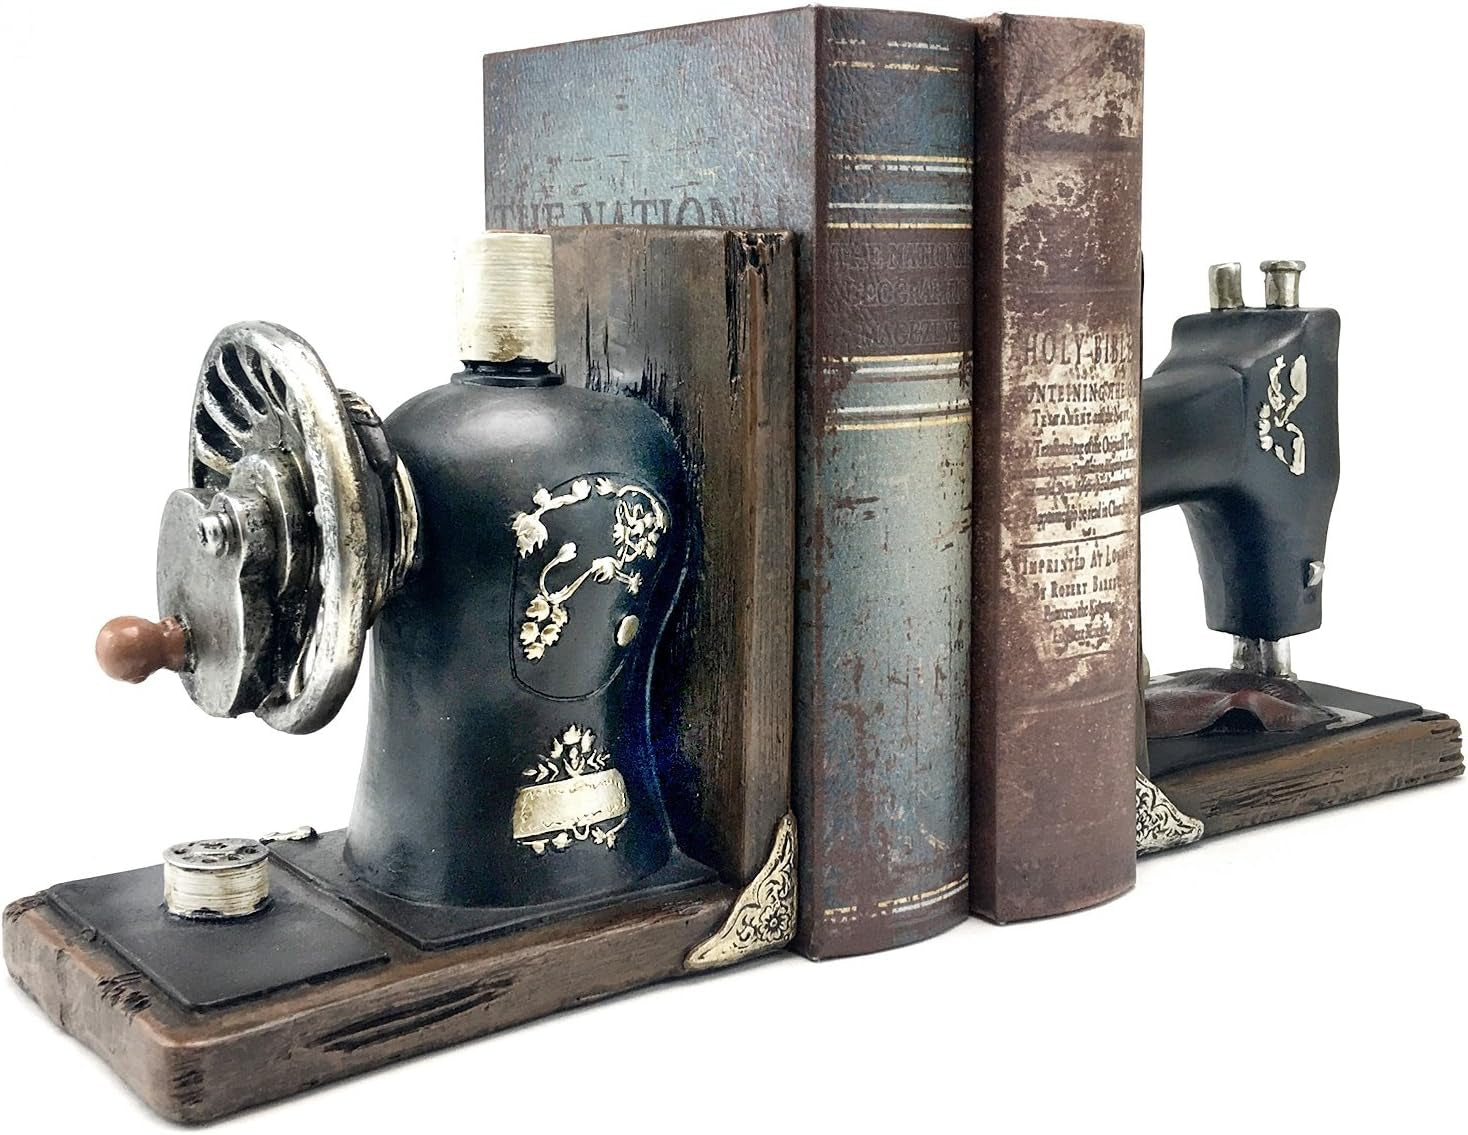 21383 Decorative Bookend Book Ends Sewing Machine Vintage Bookshelves Shelves Books Stopper Home Office Library Study Decor Heavy Duty Non Skid 6 Inch